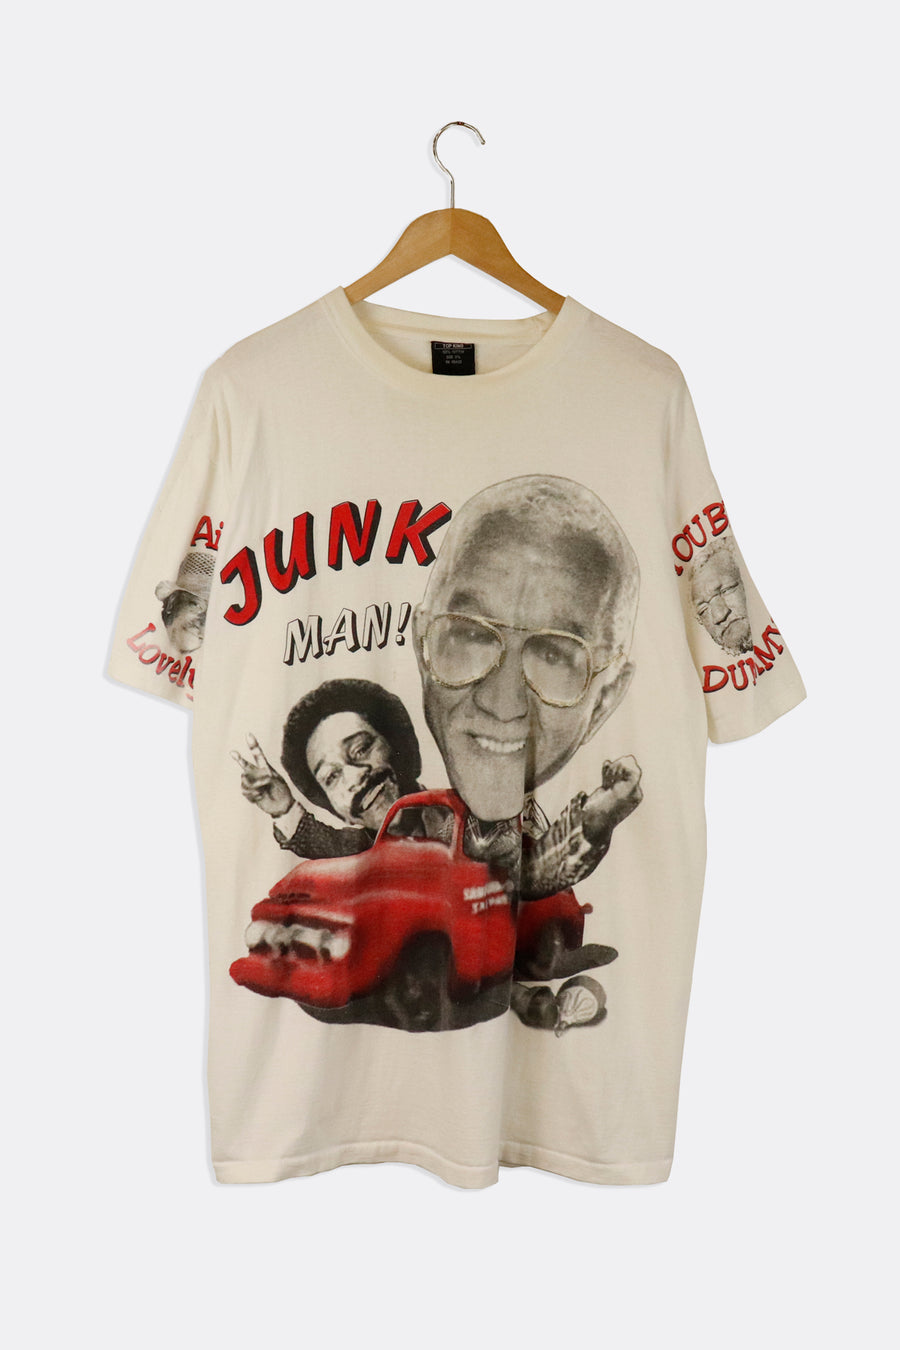 Vintage Sanford And Son Iconic Catch Phrases Characters With Big Heads In Car Holding Peace Signs T Shirt Sz 3XL